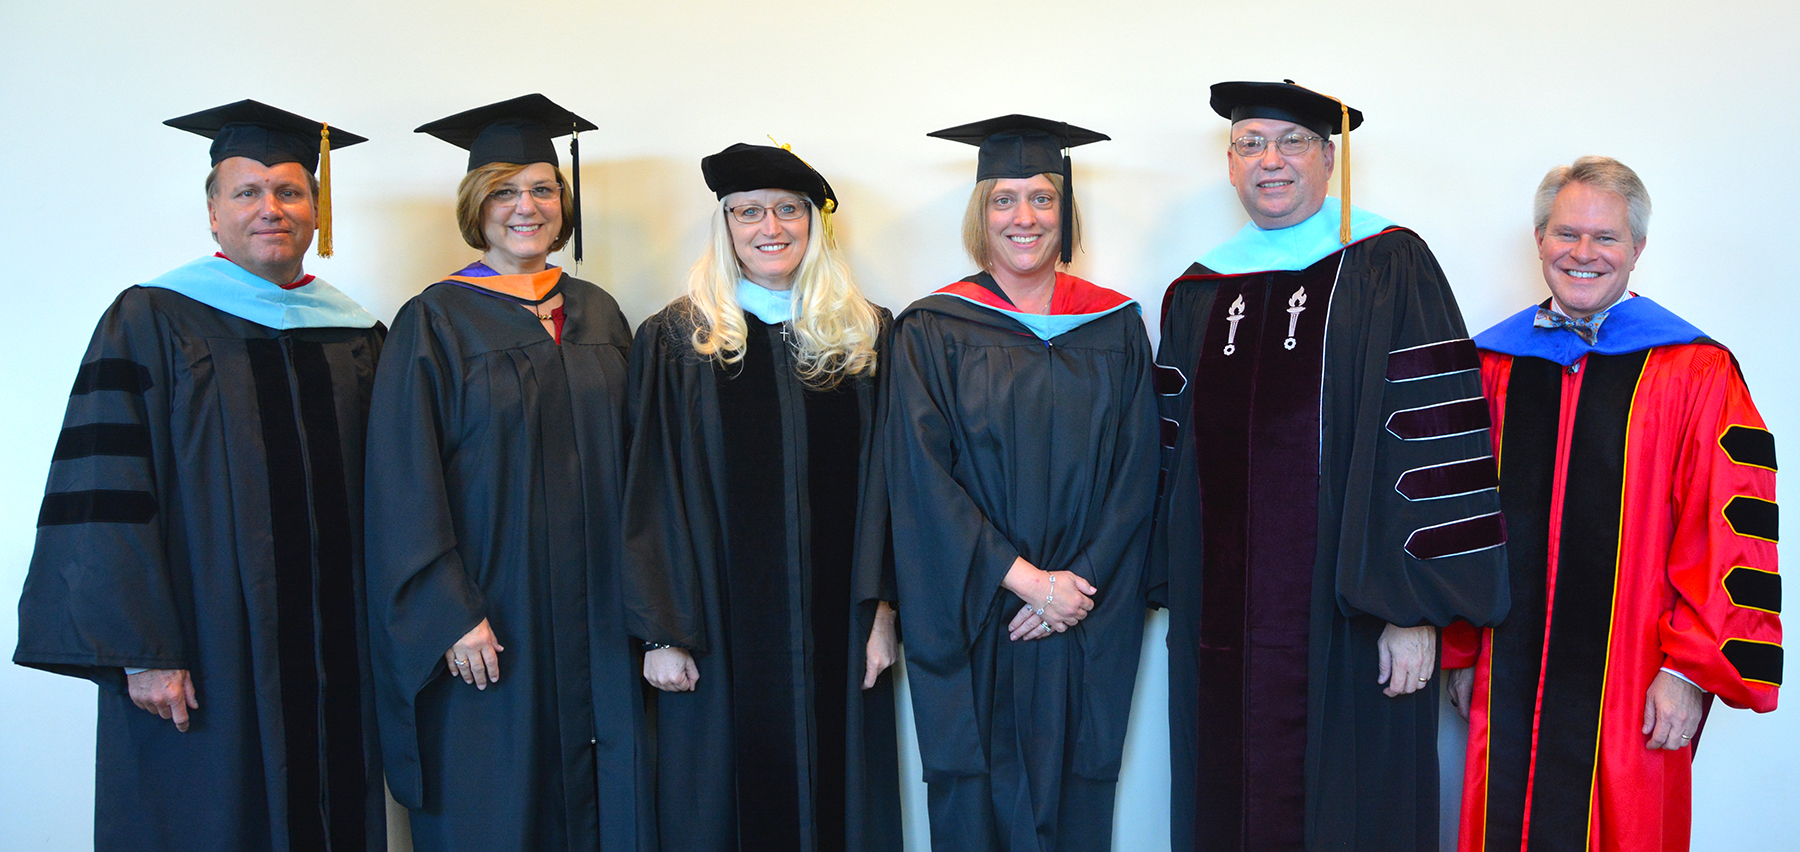 Pictured, from left, are Dr. Hal Shuler, Associate Vice President for Development; Faculty of the Year finalists Janet Sims and Dr. Angie Adams; Faculty of the Year award winner Kim Parsons; Dr. Dale McInnis, RichmondCC President; and Dr. Jimmie Williamson, NC Community College System President.